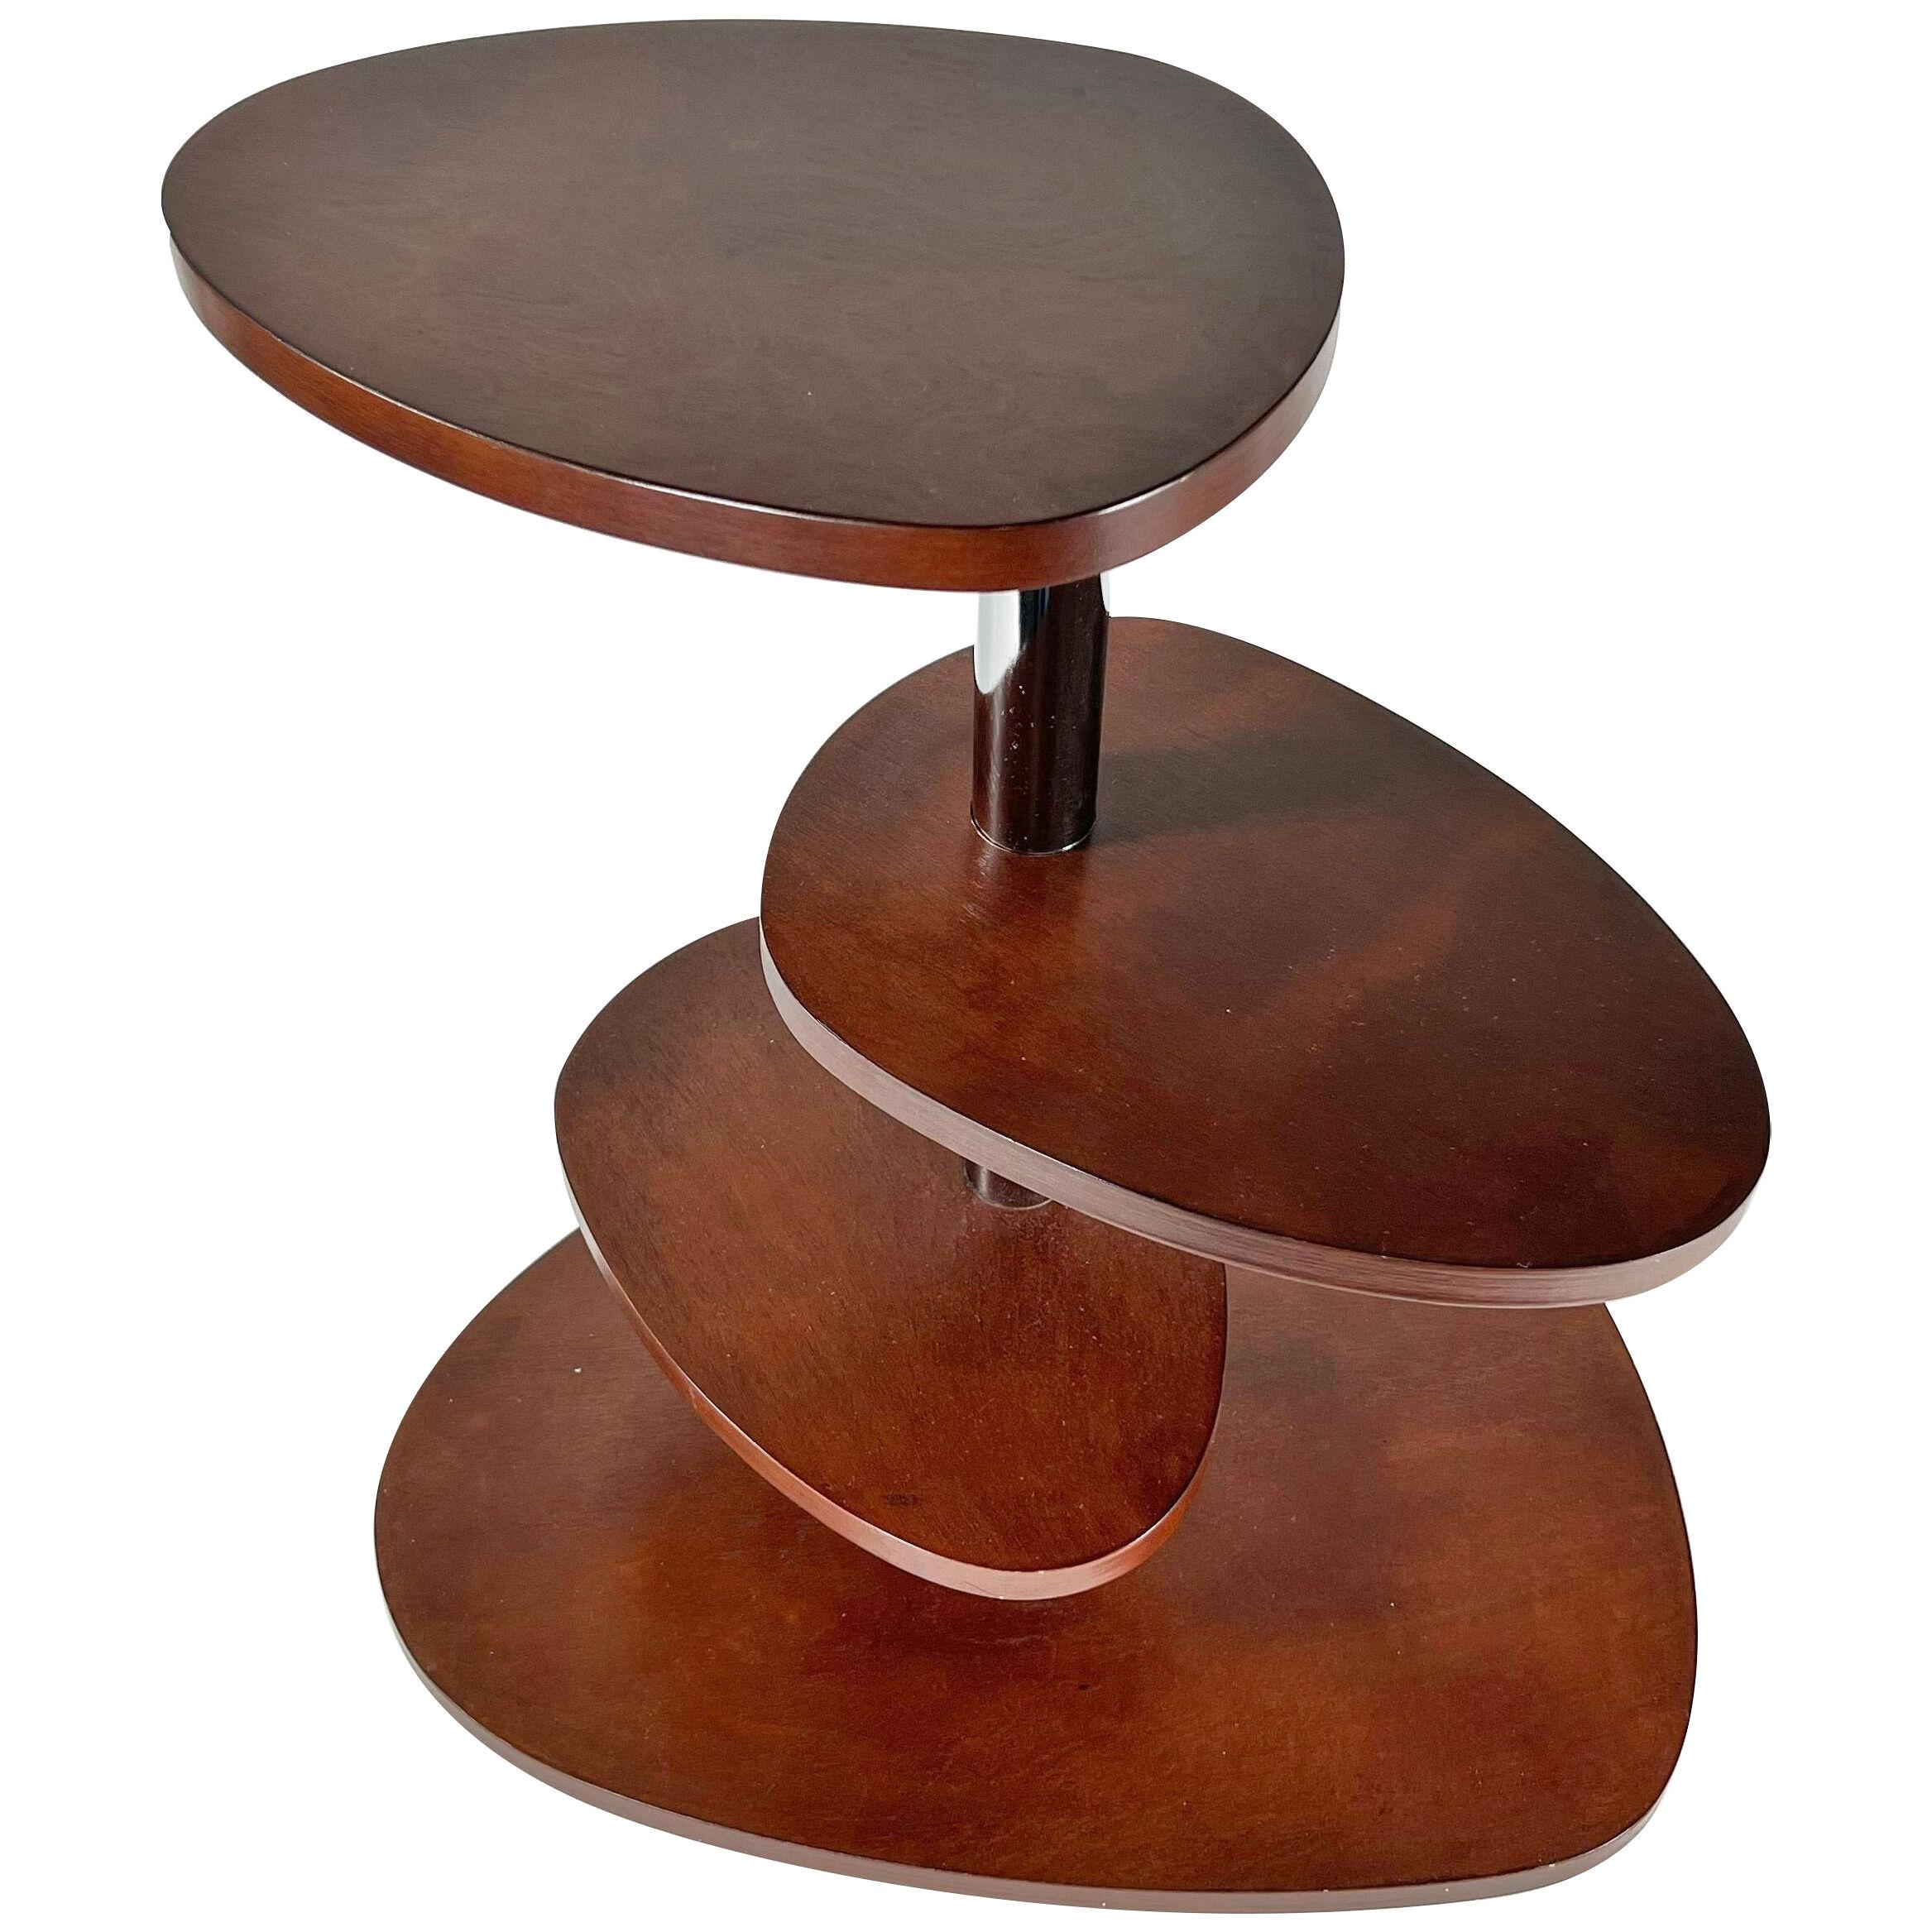 French Modern Mahogany 4 Tier Pivoting Mexique Table, style Charlotte Perriand